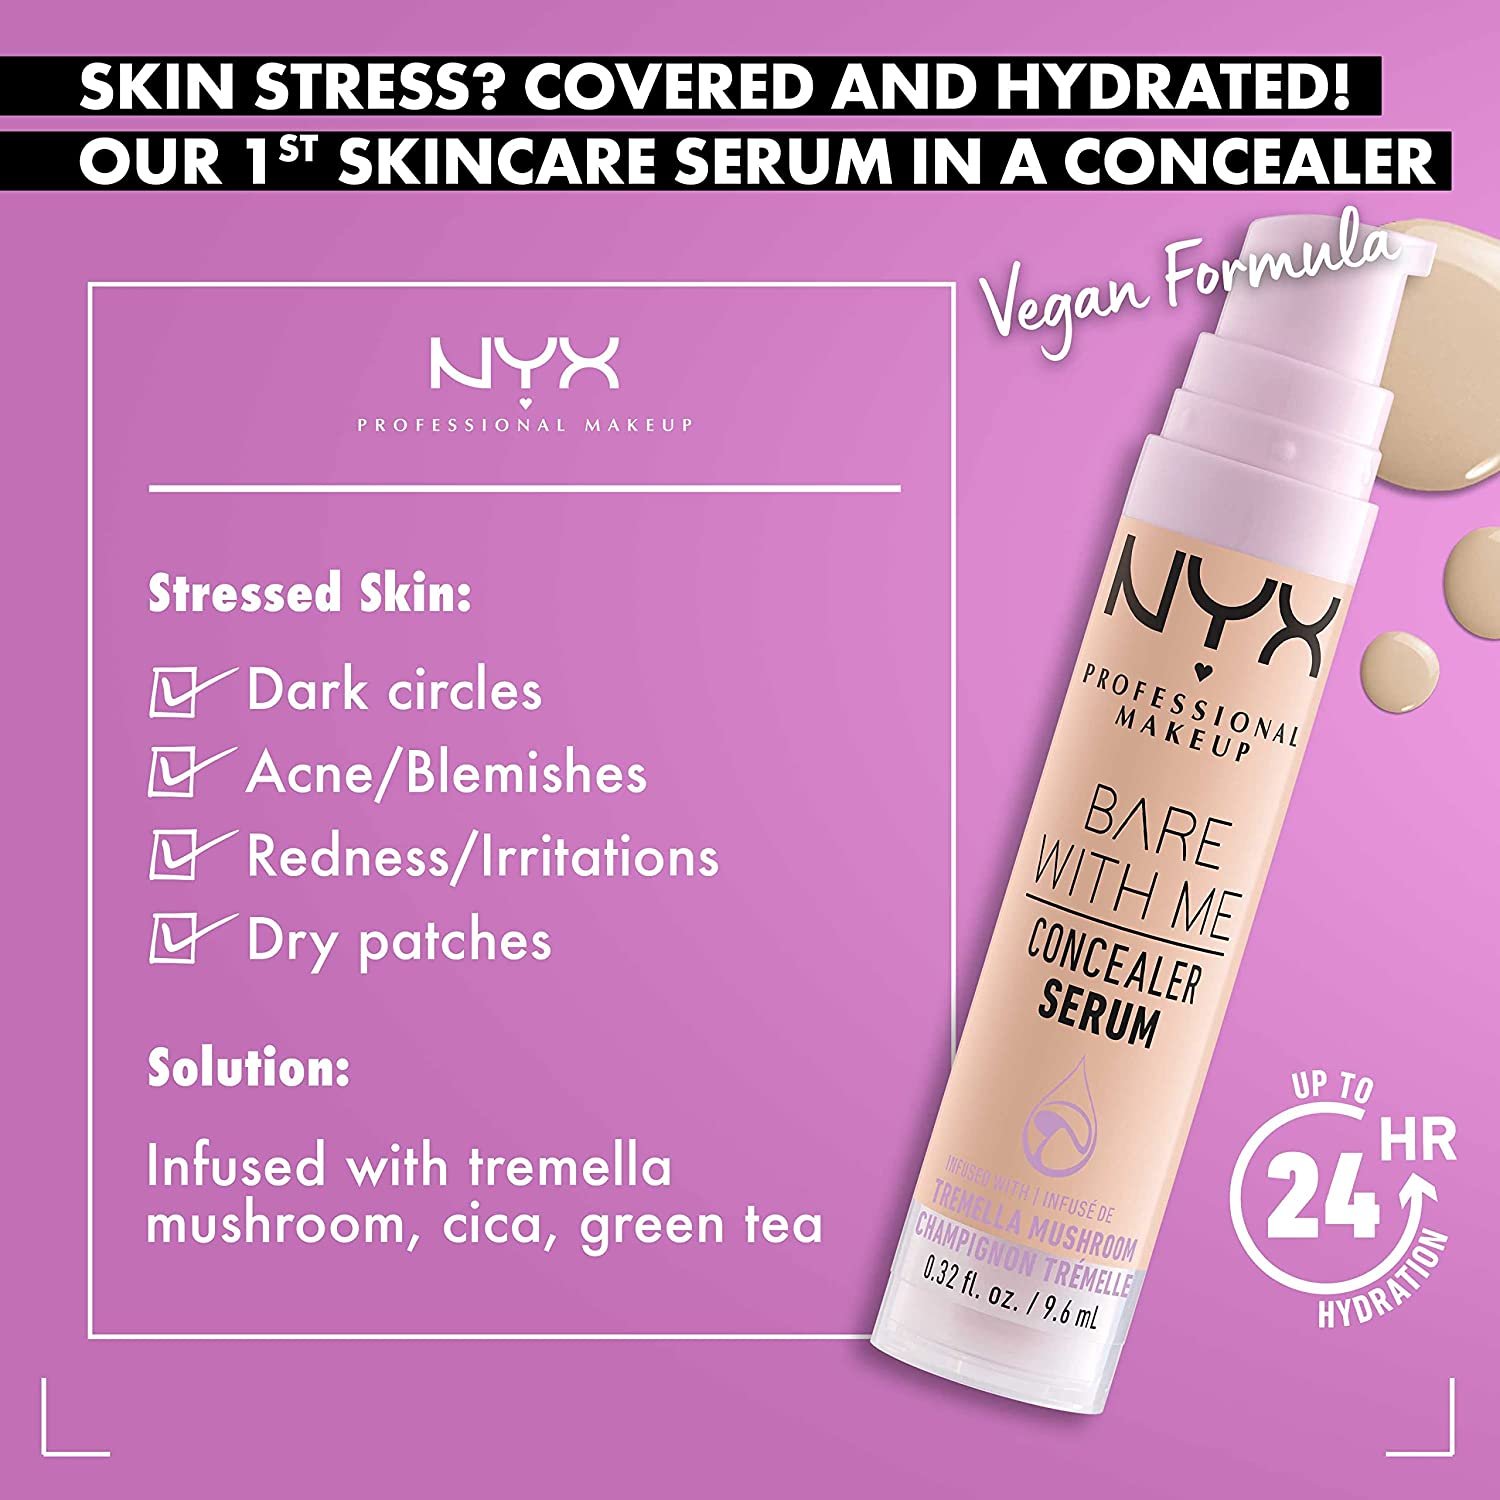 Did The NYX Bare With Me Concealer Serum (That Went Viral On TikTok) Cover  My Dark circles? — a broke beauty blogger